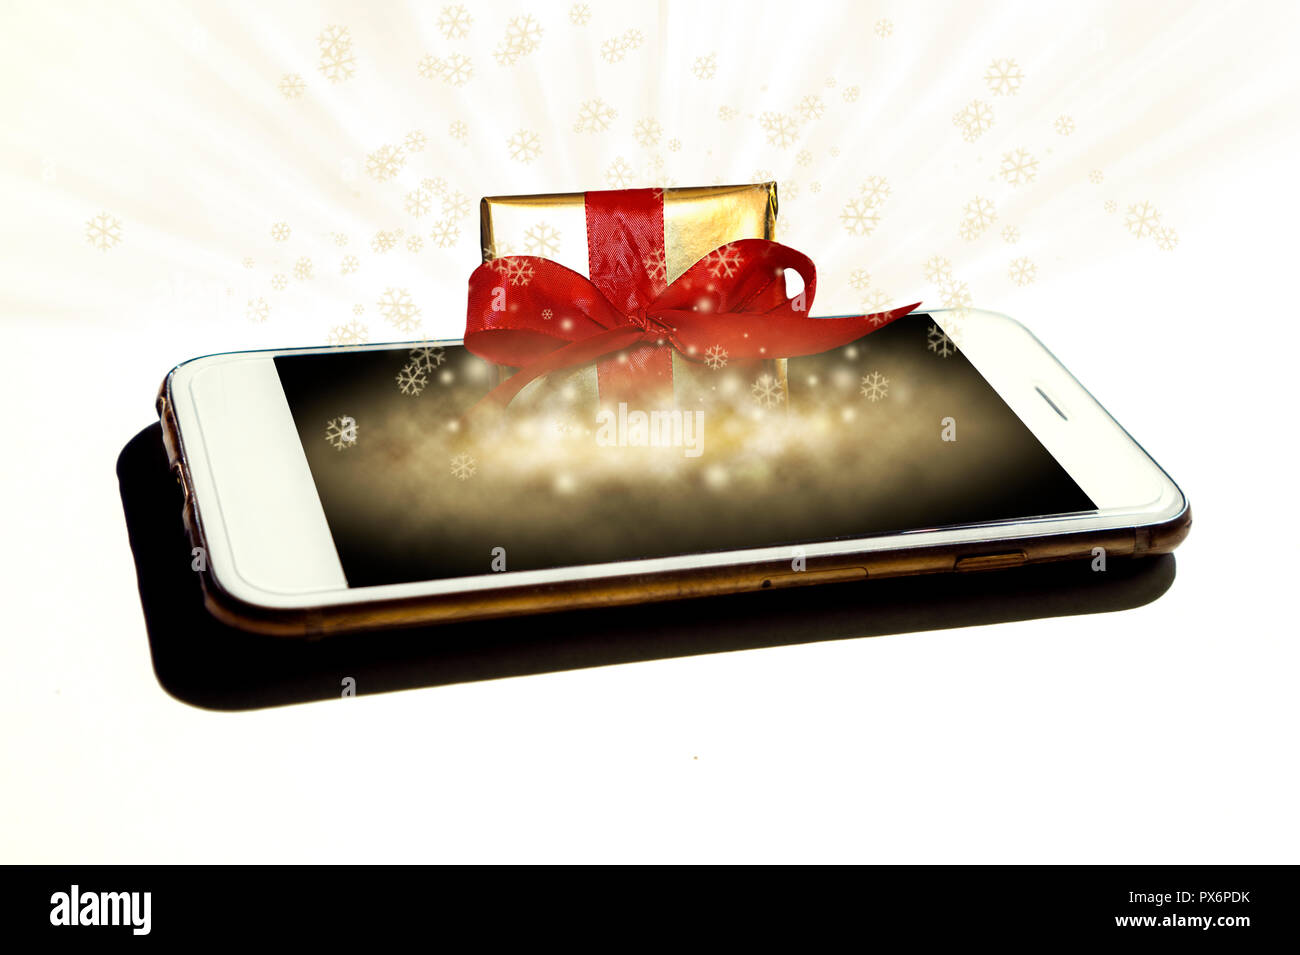 Gold present box magically coming out from the isolated smartphone - Concept of e-commerce sales, online shopping, digital marketing at christmas time Stock Photo